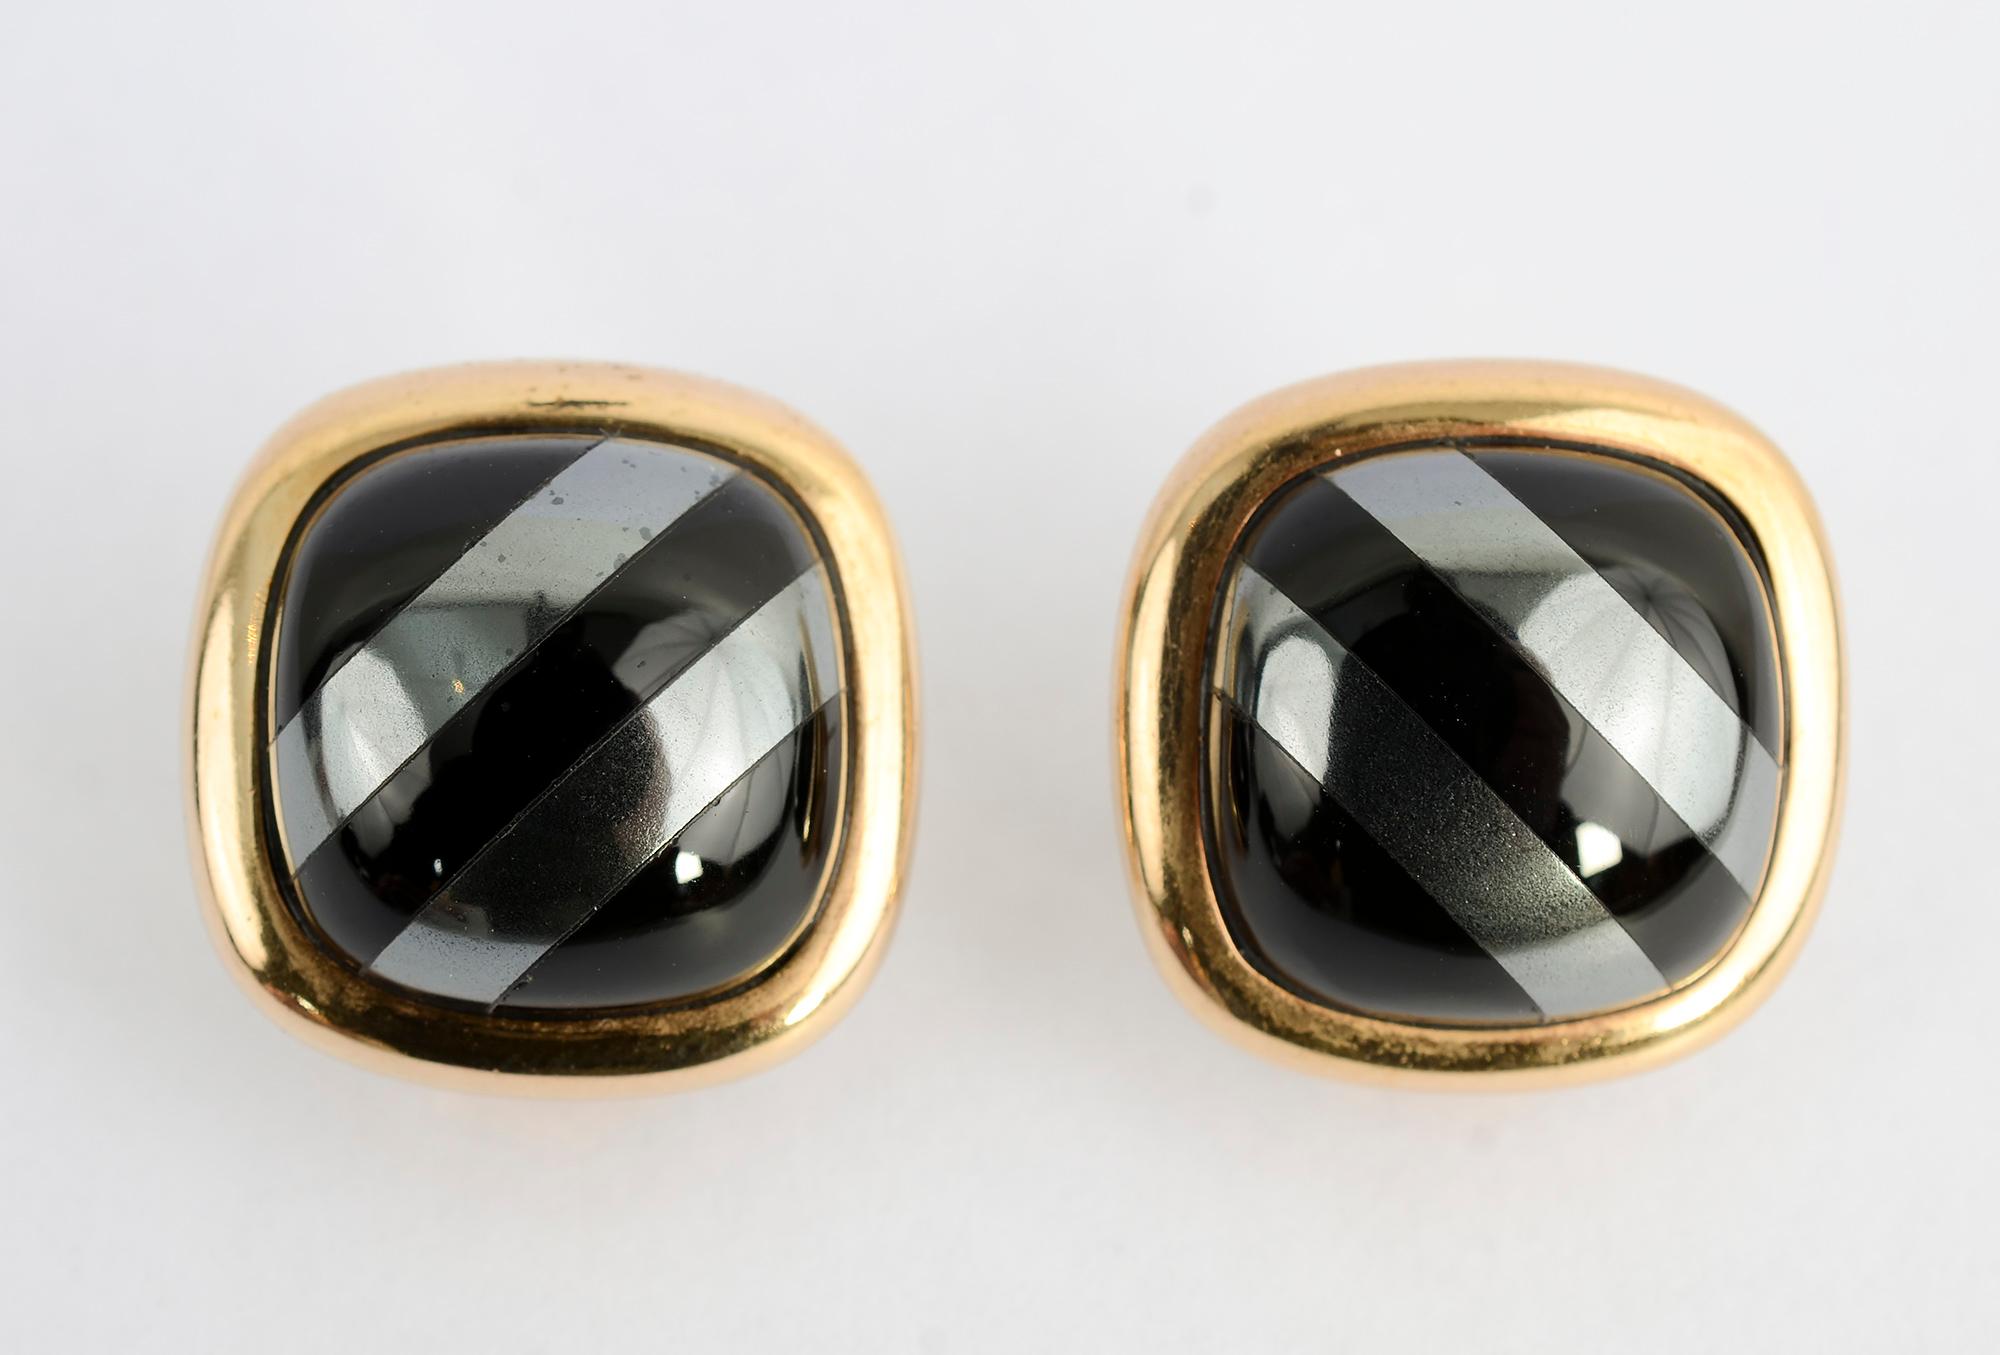 Chic earrings of alternating diagonal stripes of hematite and black onyx framed in gold. The backs are posts and clips. The earrings measure 7/8